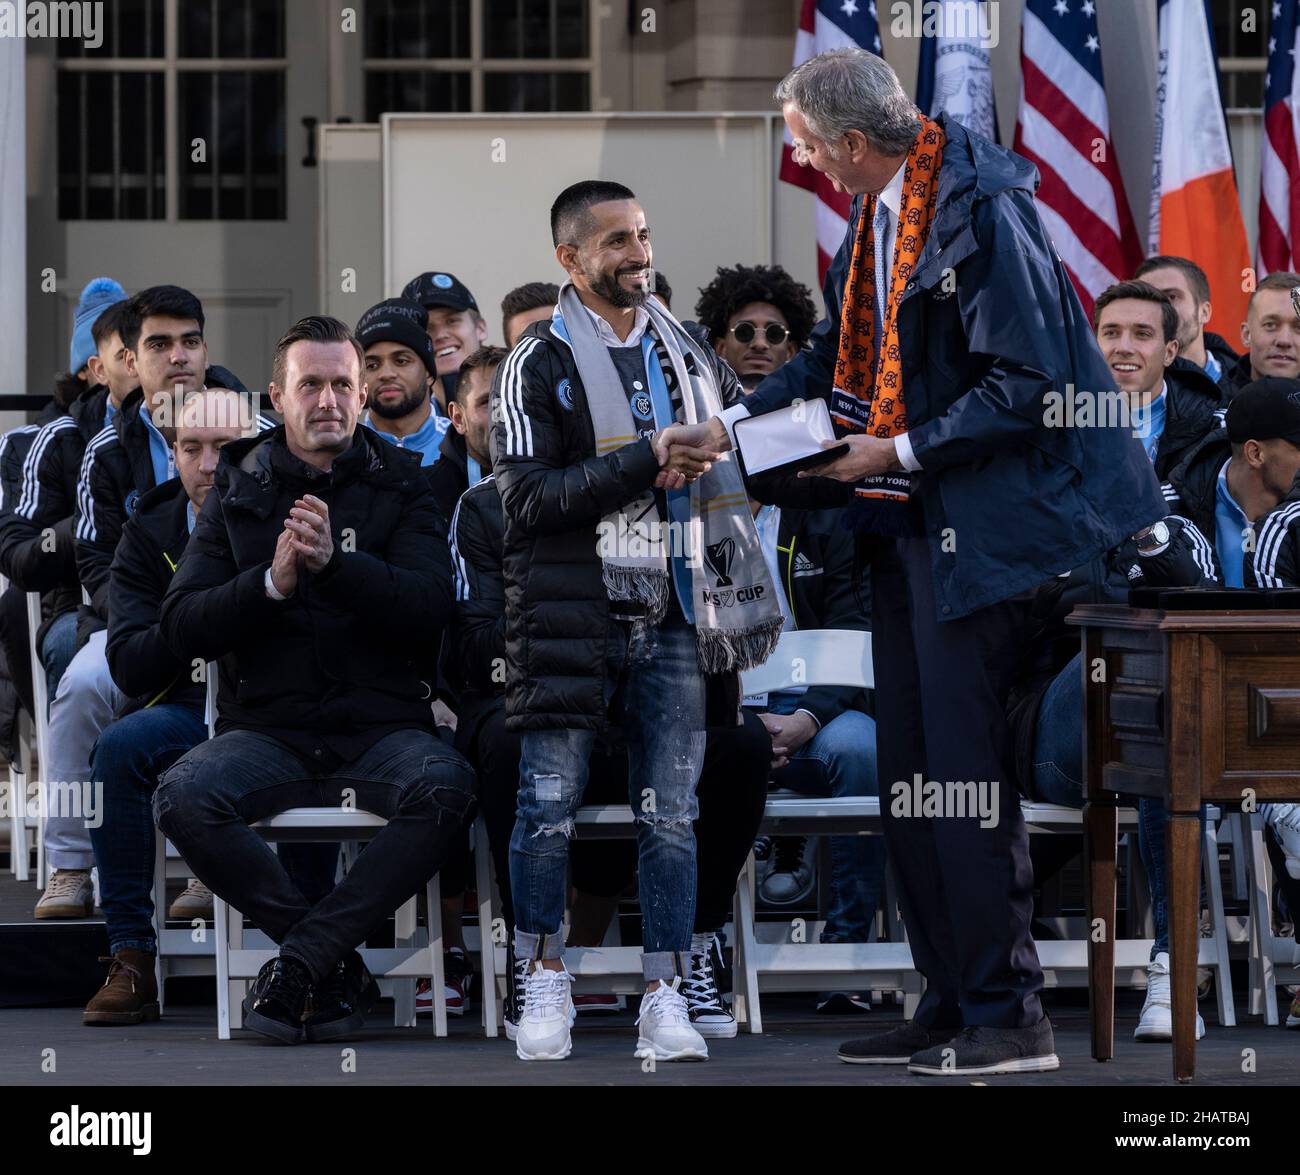 New York, NY - December 14, 2021: Midfielder Maximiliano Moralez received Keys to the City from mayor Bill de Blasio during celebration for NYCFC winning the 2021 MLS Cup on City Hall steps Stock Photo